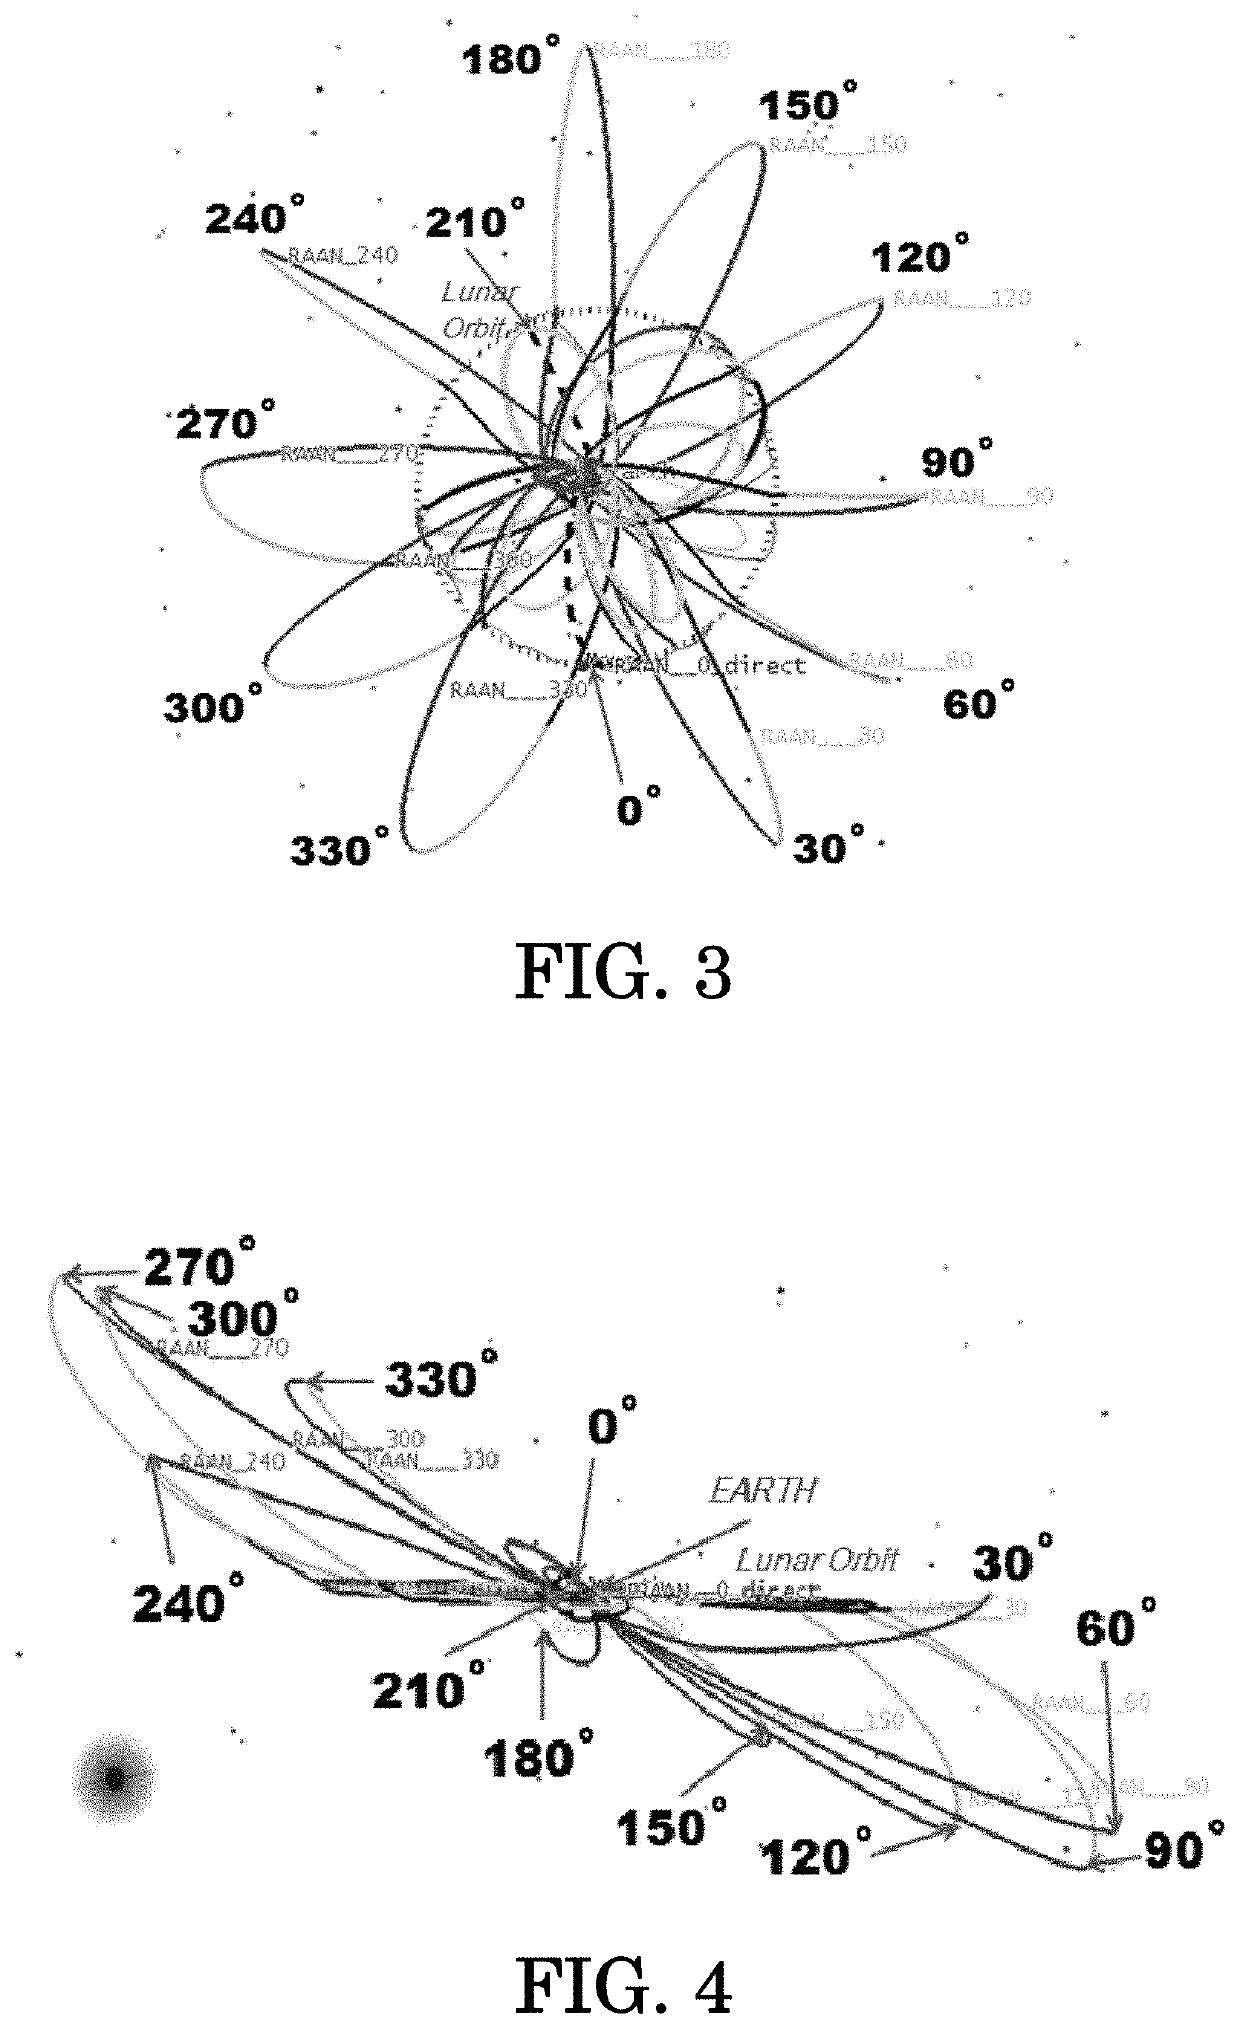 Method for transferring a spacecraft from geosynchronous transfer orbit to lunar orbit